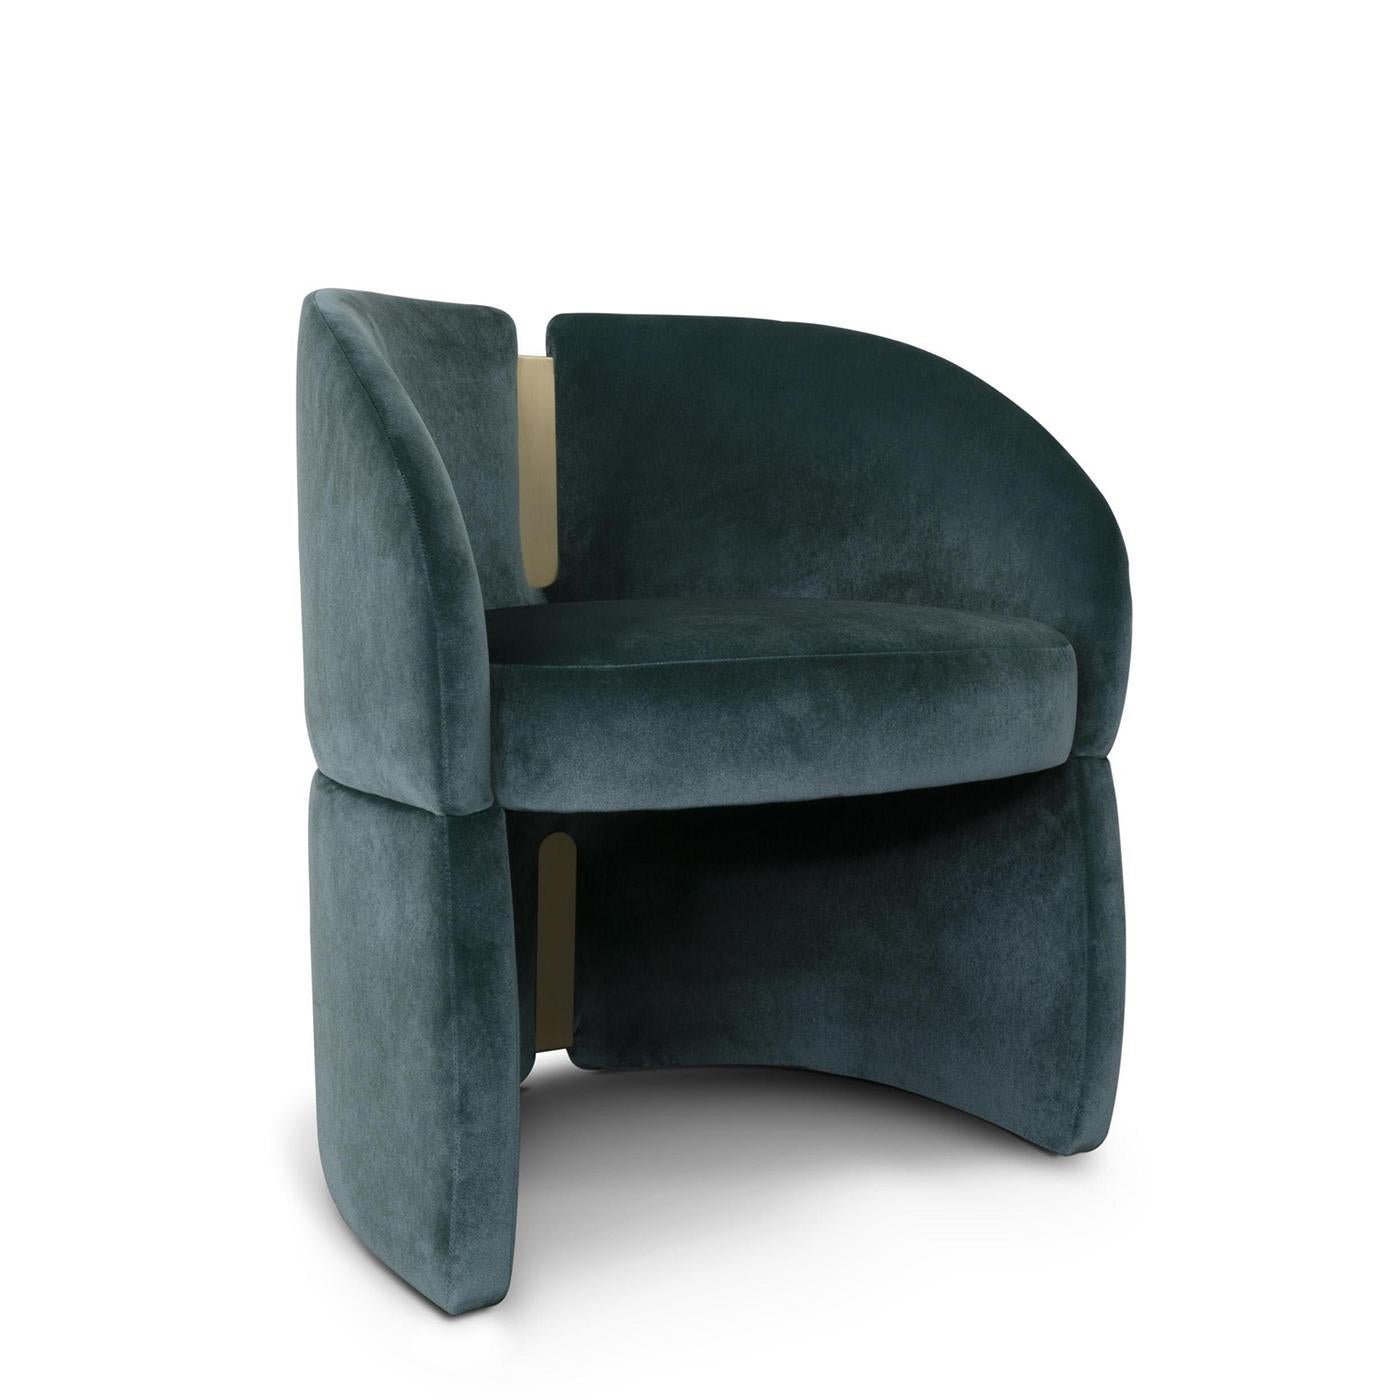 Chair Barnett with solid wood structure, upholstered and
covered with high quality velvet fabric. With solid brass in
aged finish.
Also available with other fabric colors on request.